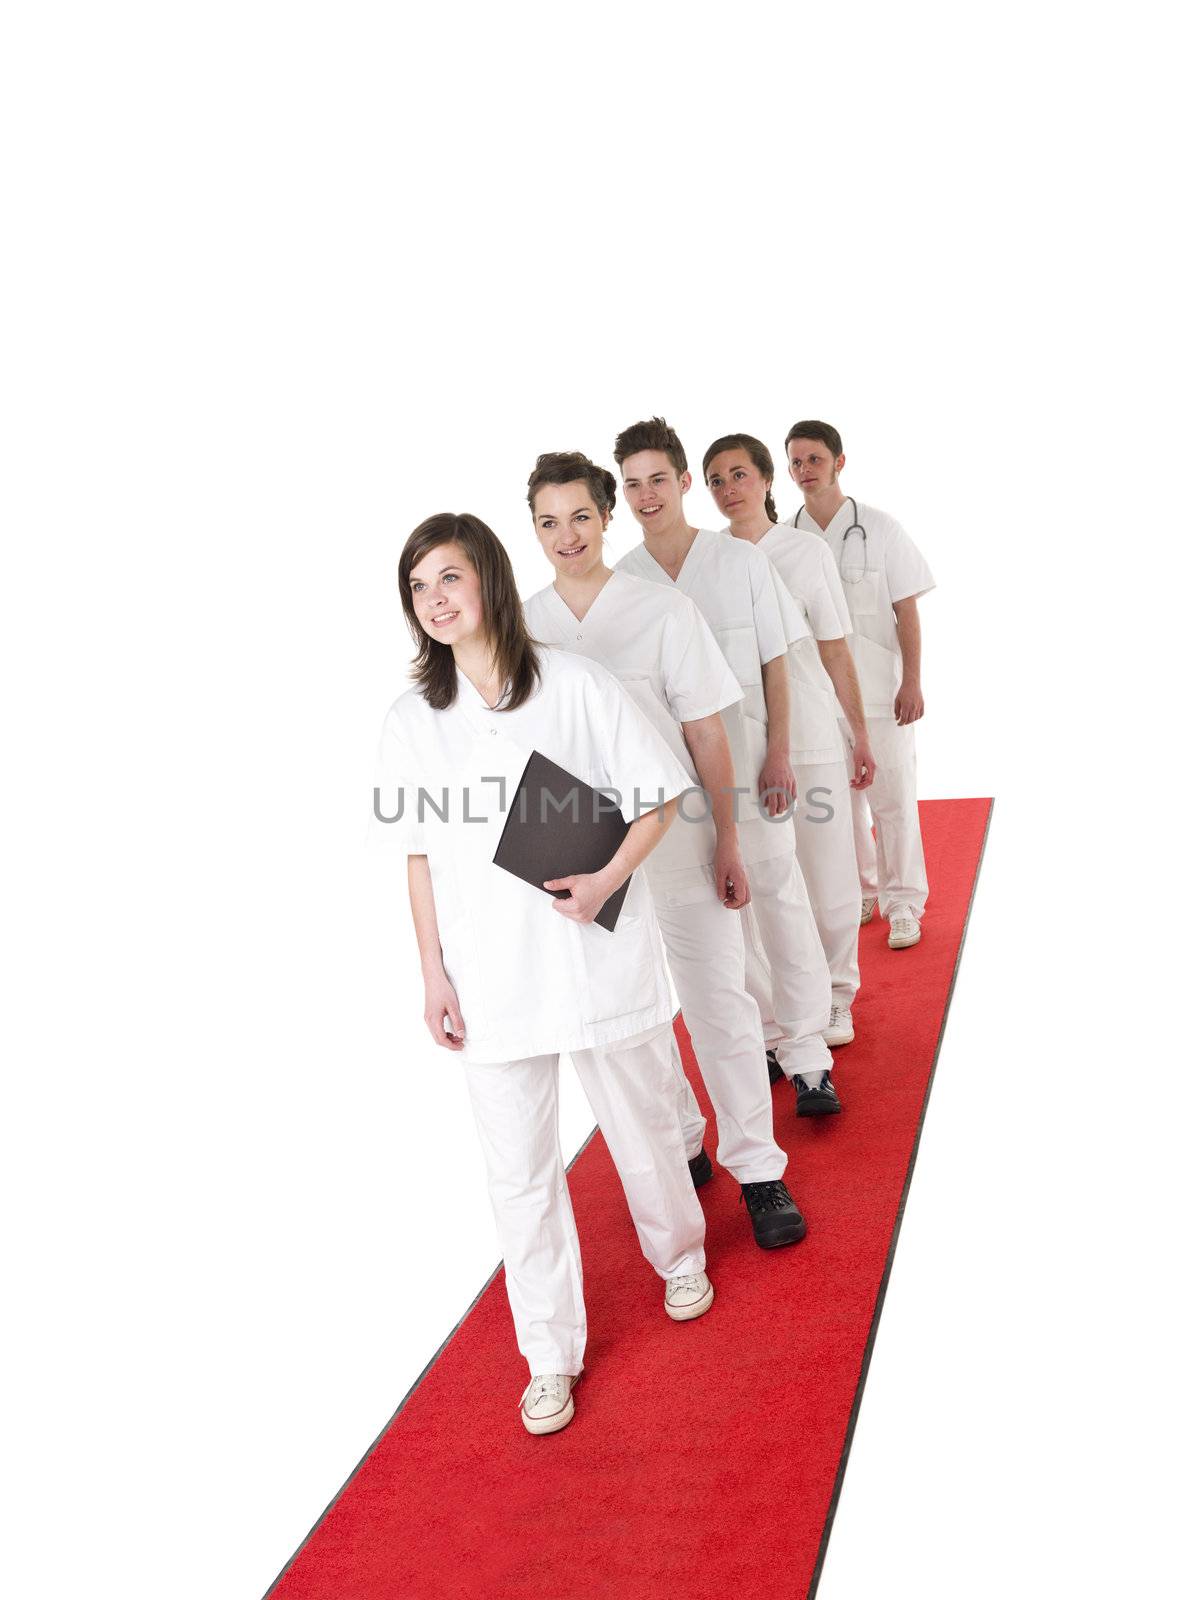 Doctor and Nurses on a red carpet isolated on white background